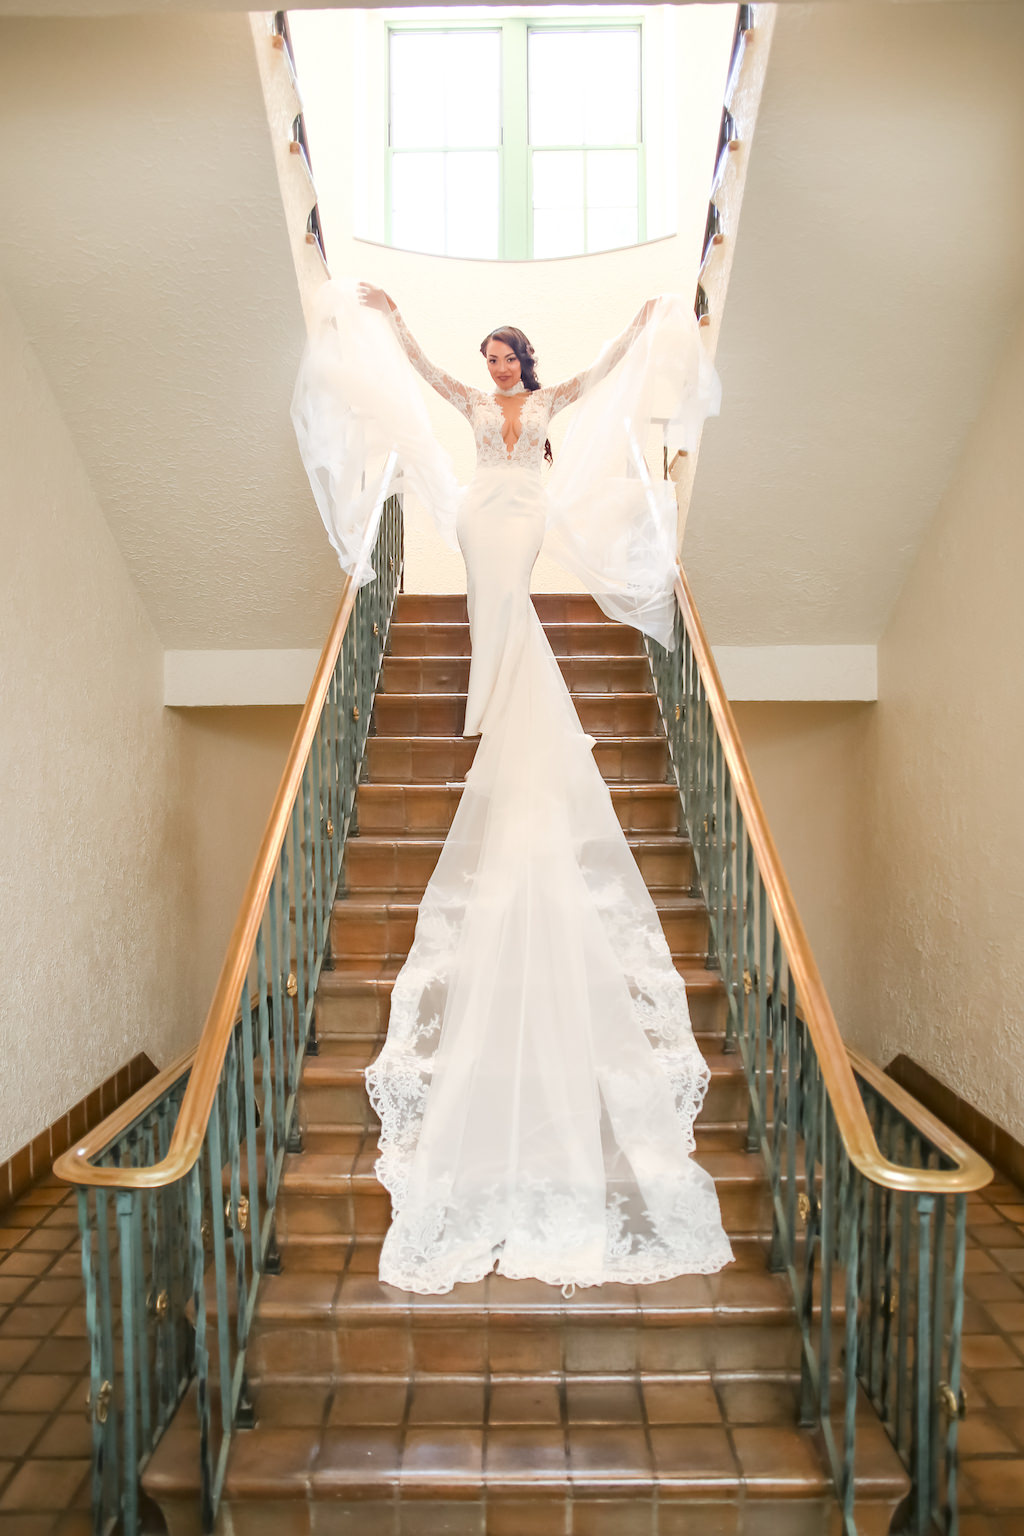 Bridal Portrait on Staircase, Lace and Sheer Long Sleeve Low V-Neck Wedding Dress with Long Train and Veil, Braided Hairstyle | St. Petersburg Photographer Lifelong Photography Studios